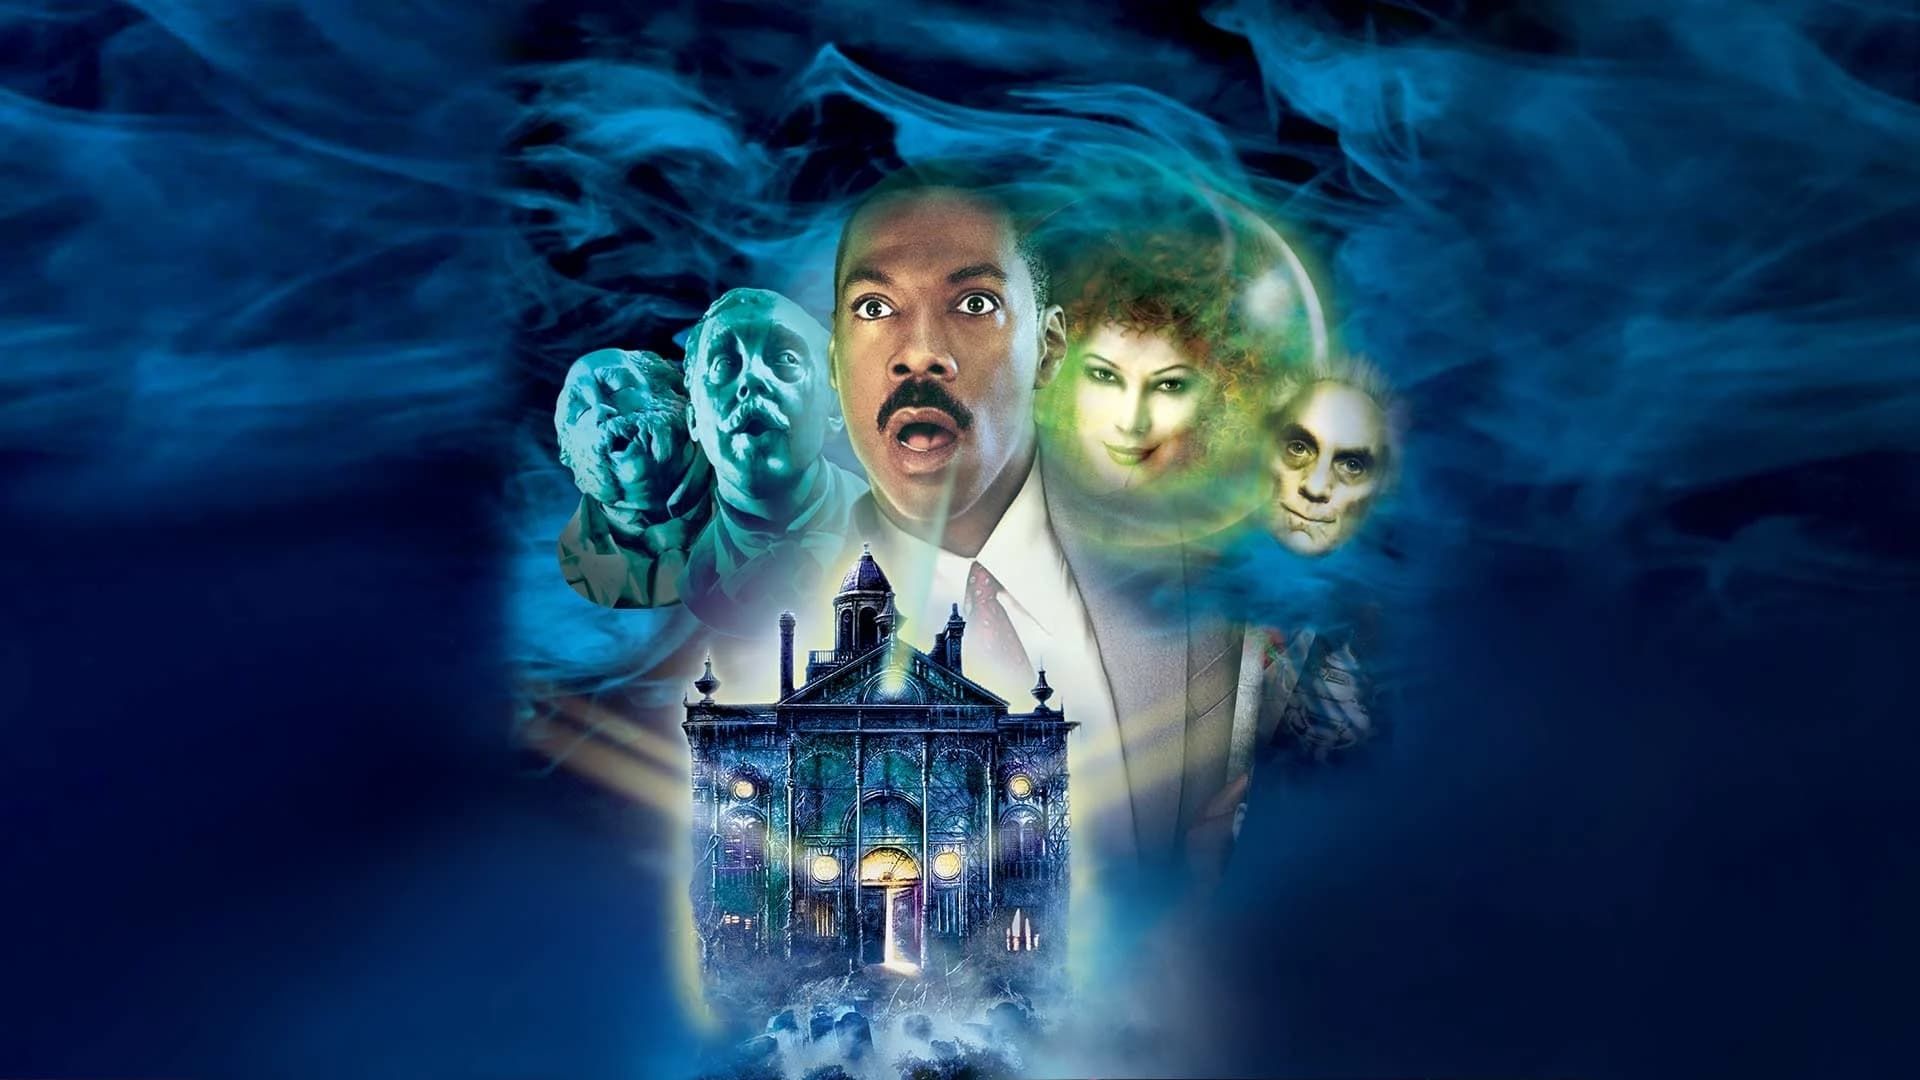 Watch The Haunted Mansion Full Movie Streaming Online